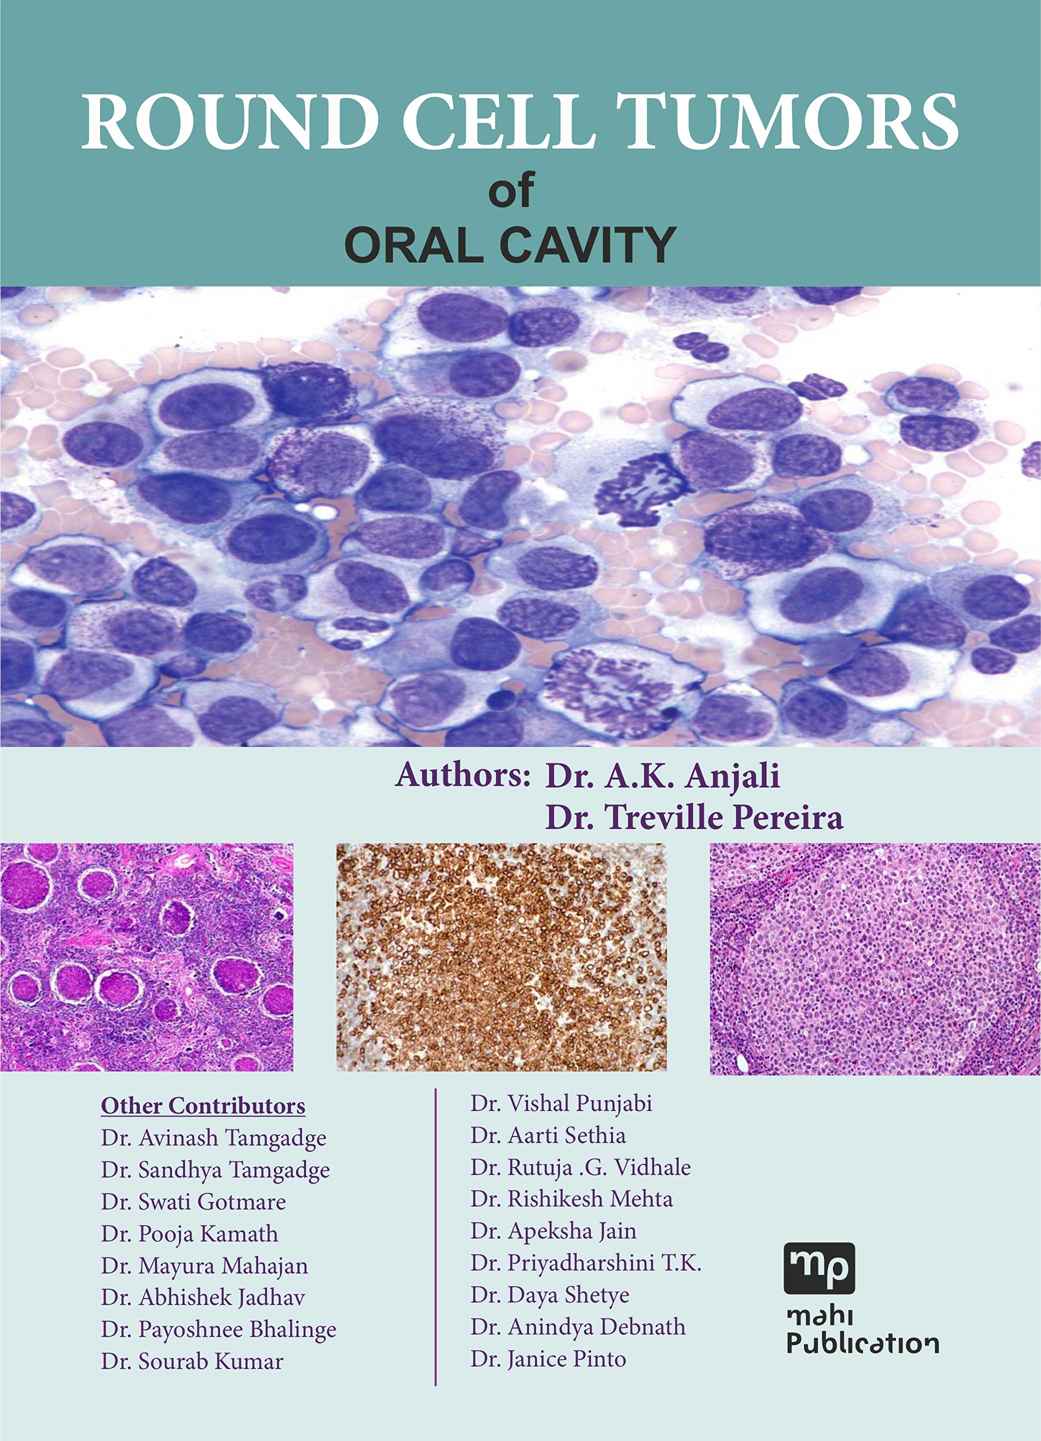 Round Cell Tumors of Oral Cavity